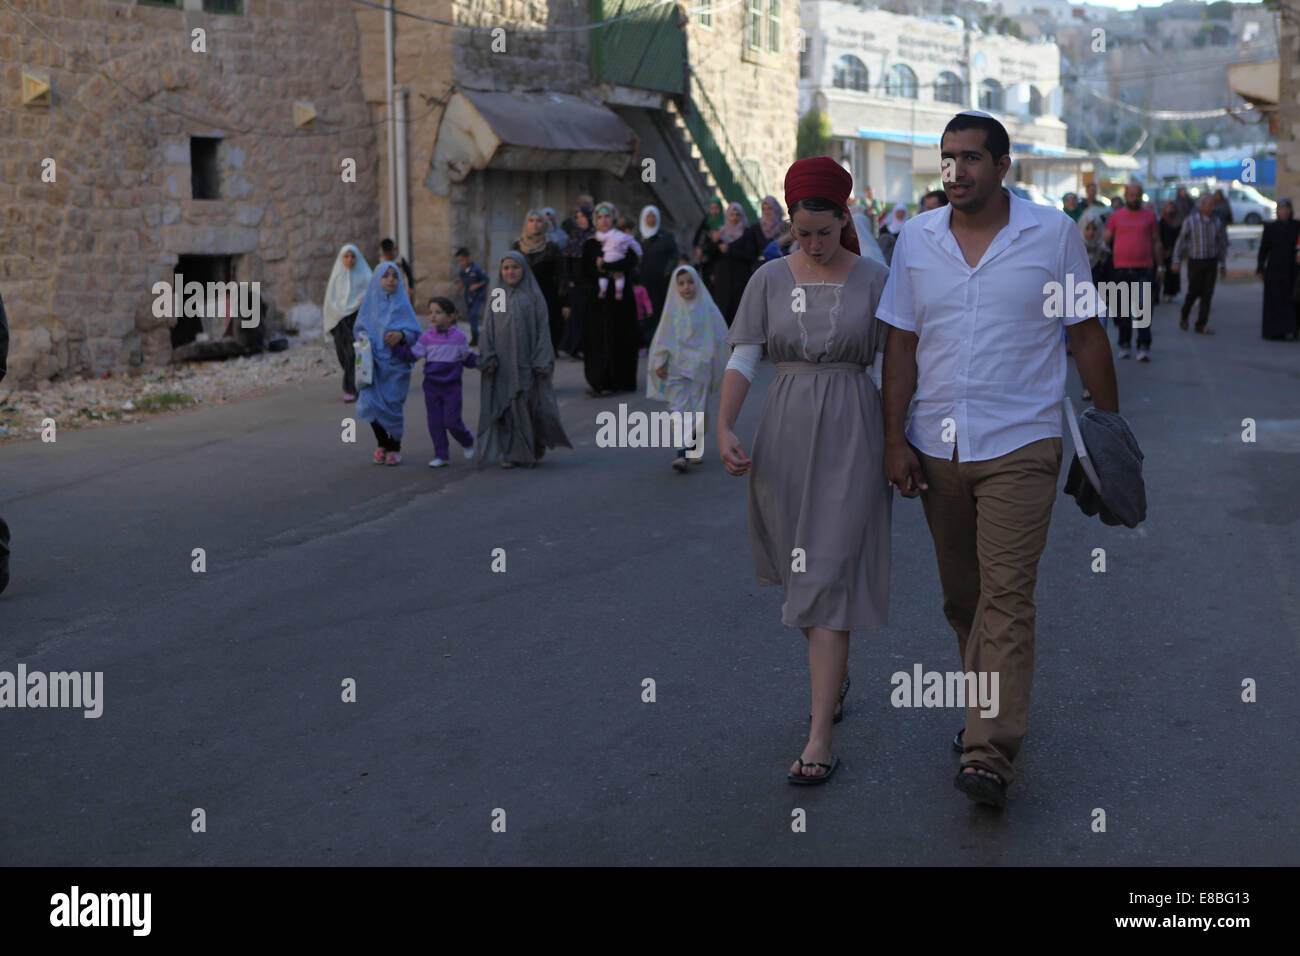 Hebron, Muslims. 4th Oct, 2014. Jewish worshipers walk near the al-Ibrahimi mosque, a religious site to Muslims, in the West Bank City of Hebron on Oct. 4, 2014. The Jewish fast of Yom Kippur is coinciding with the Muslim festival of Eid al-Adha for the first time in three decades. The concurrence of the holy days has not occurred for 33 years because the two faiths use different lunar calendars. © Mamoun Wazwaz/Xinhua/Alamy Live News Stock Photo